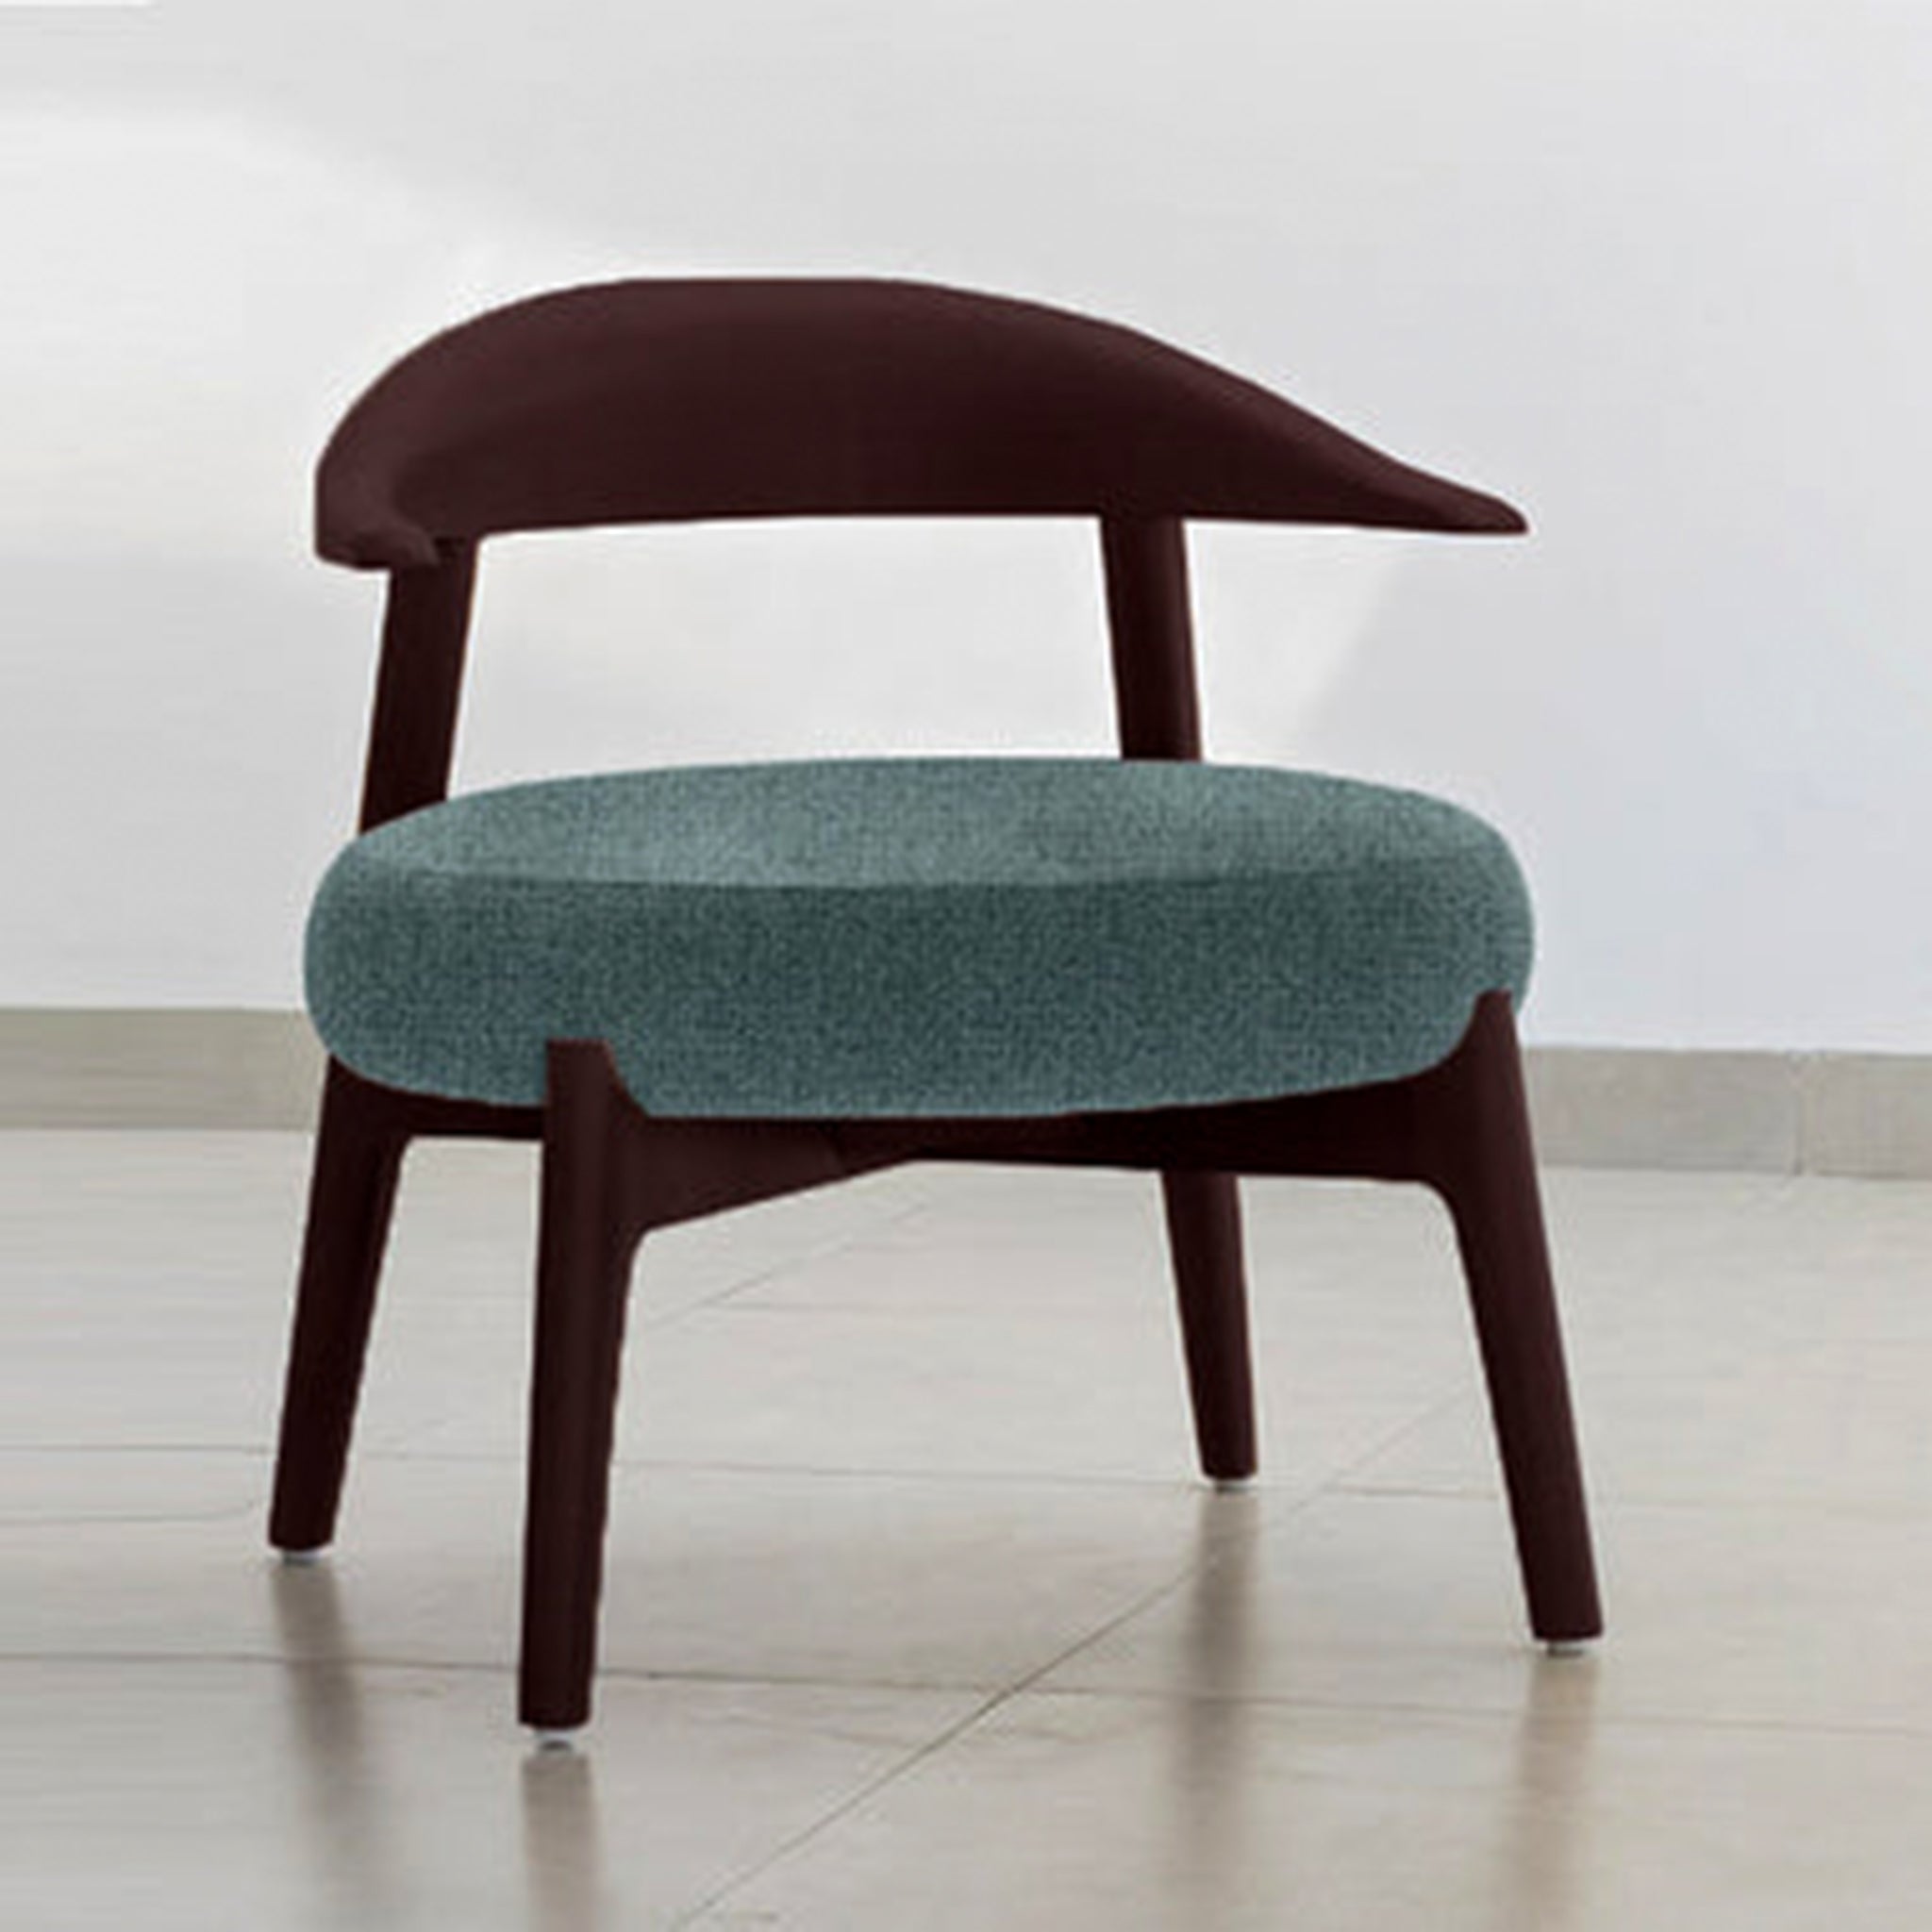 "The Hyde Accent Chair with unique wooden curves and cushioned seat"